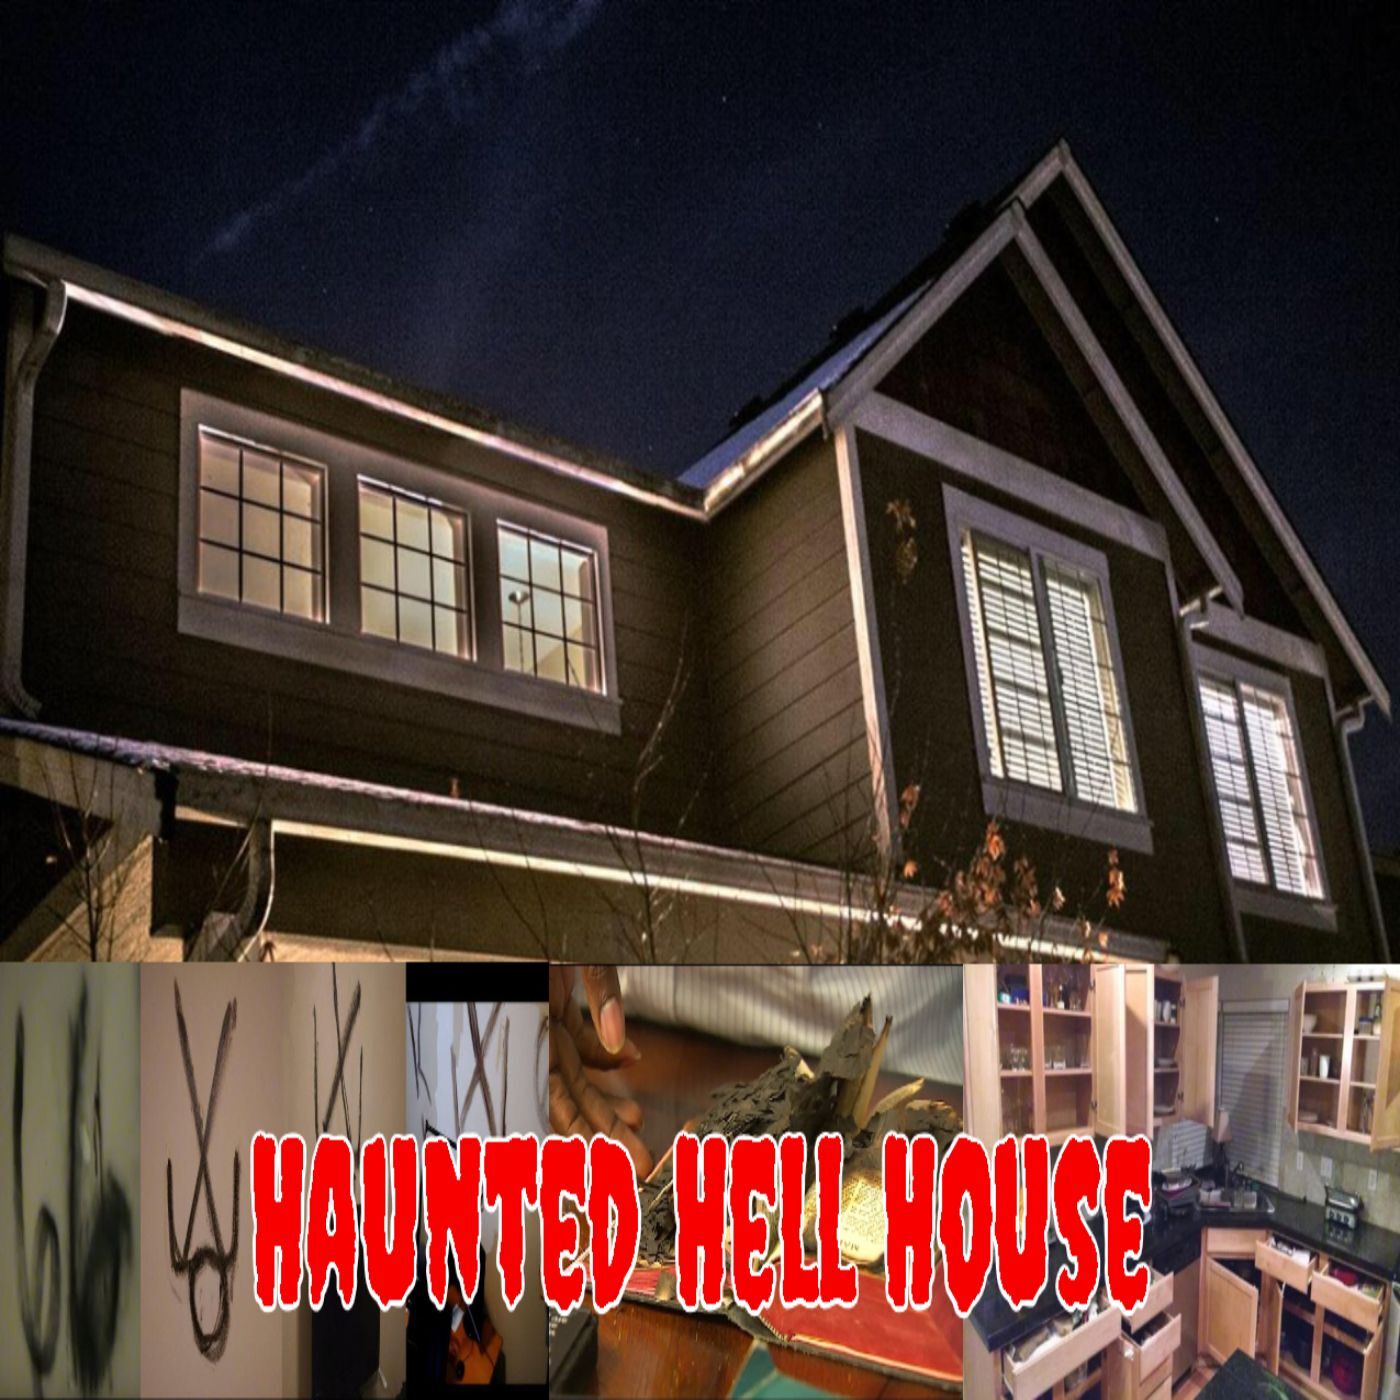 Ep. #336: Haunted Hell House w/ Keith Linder